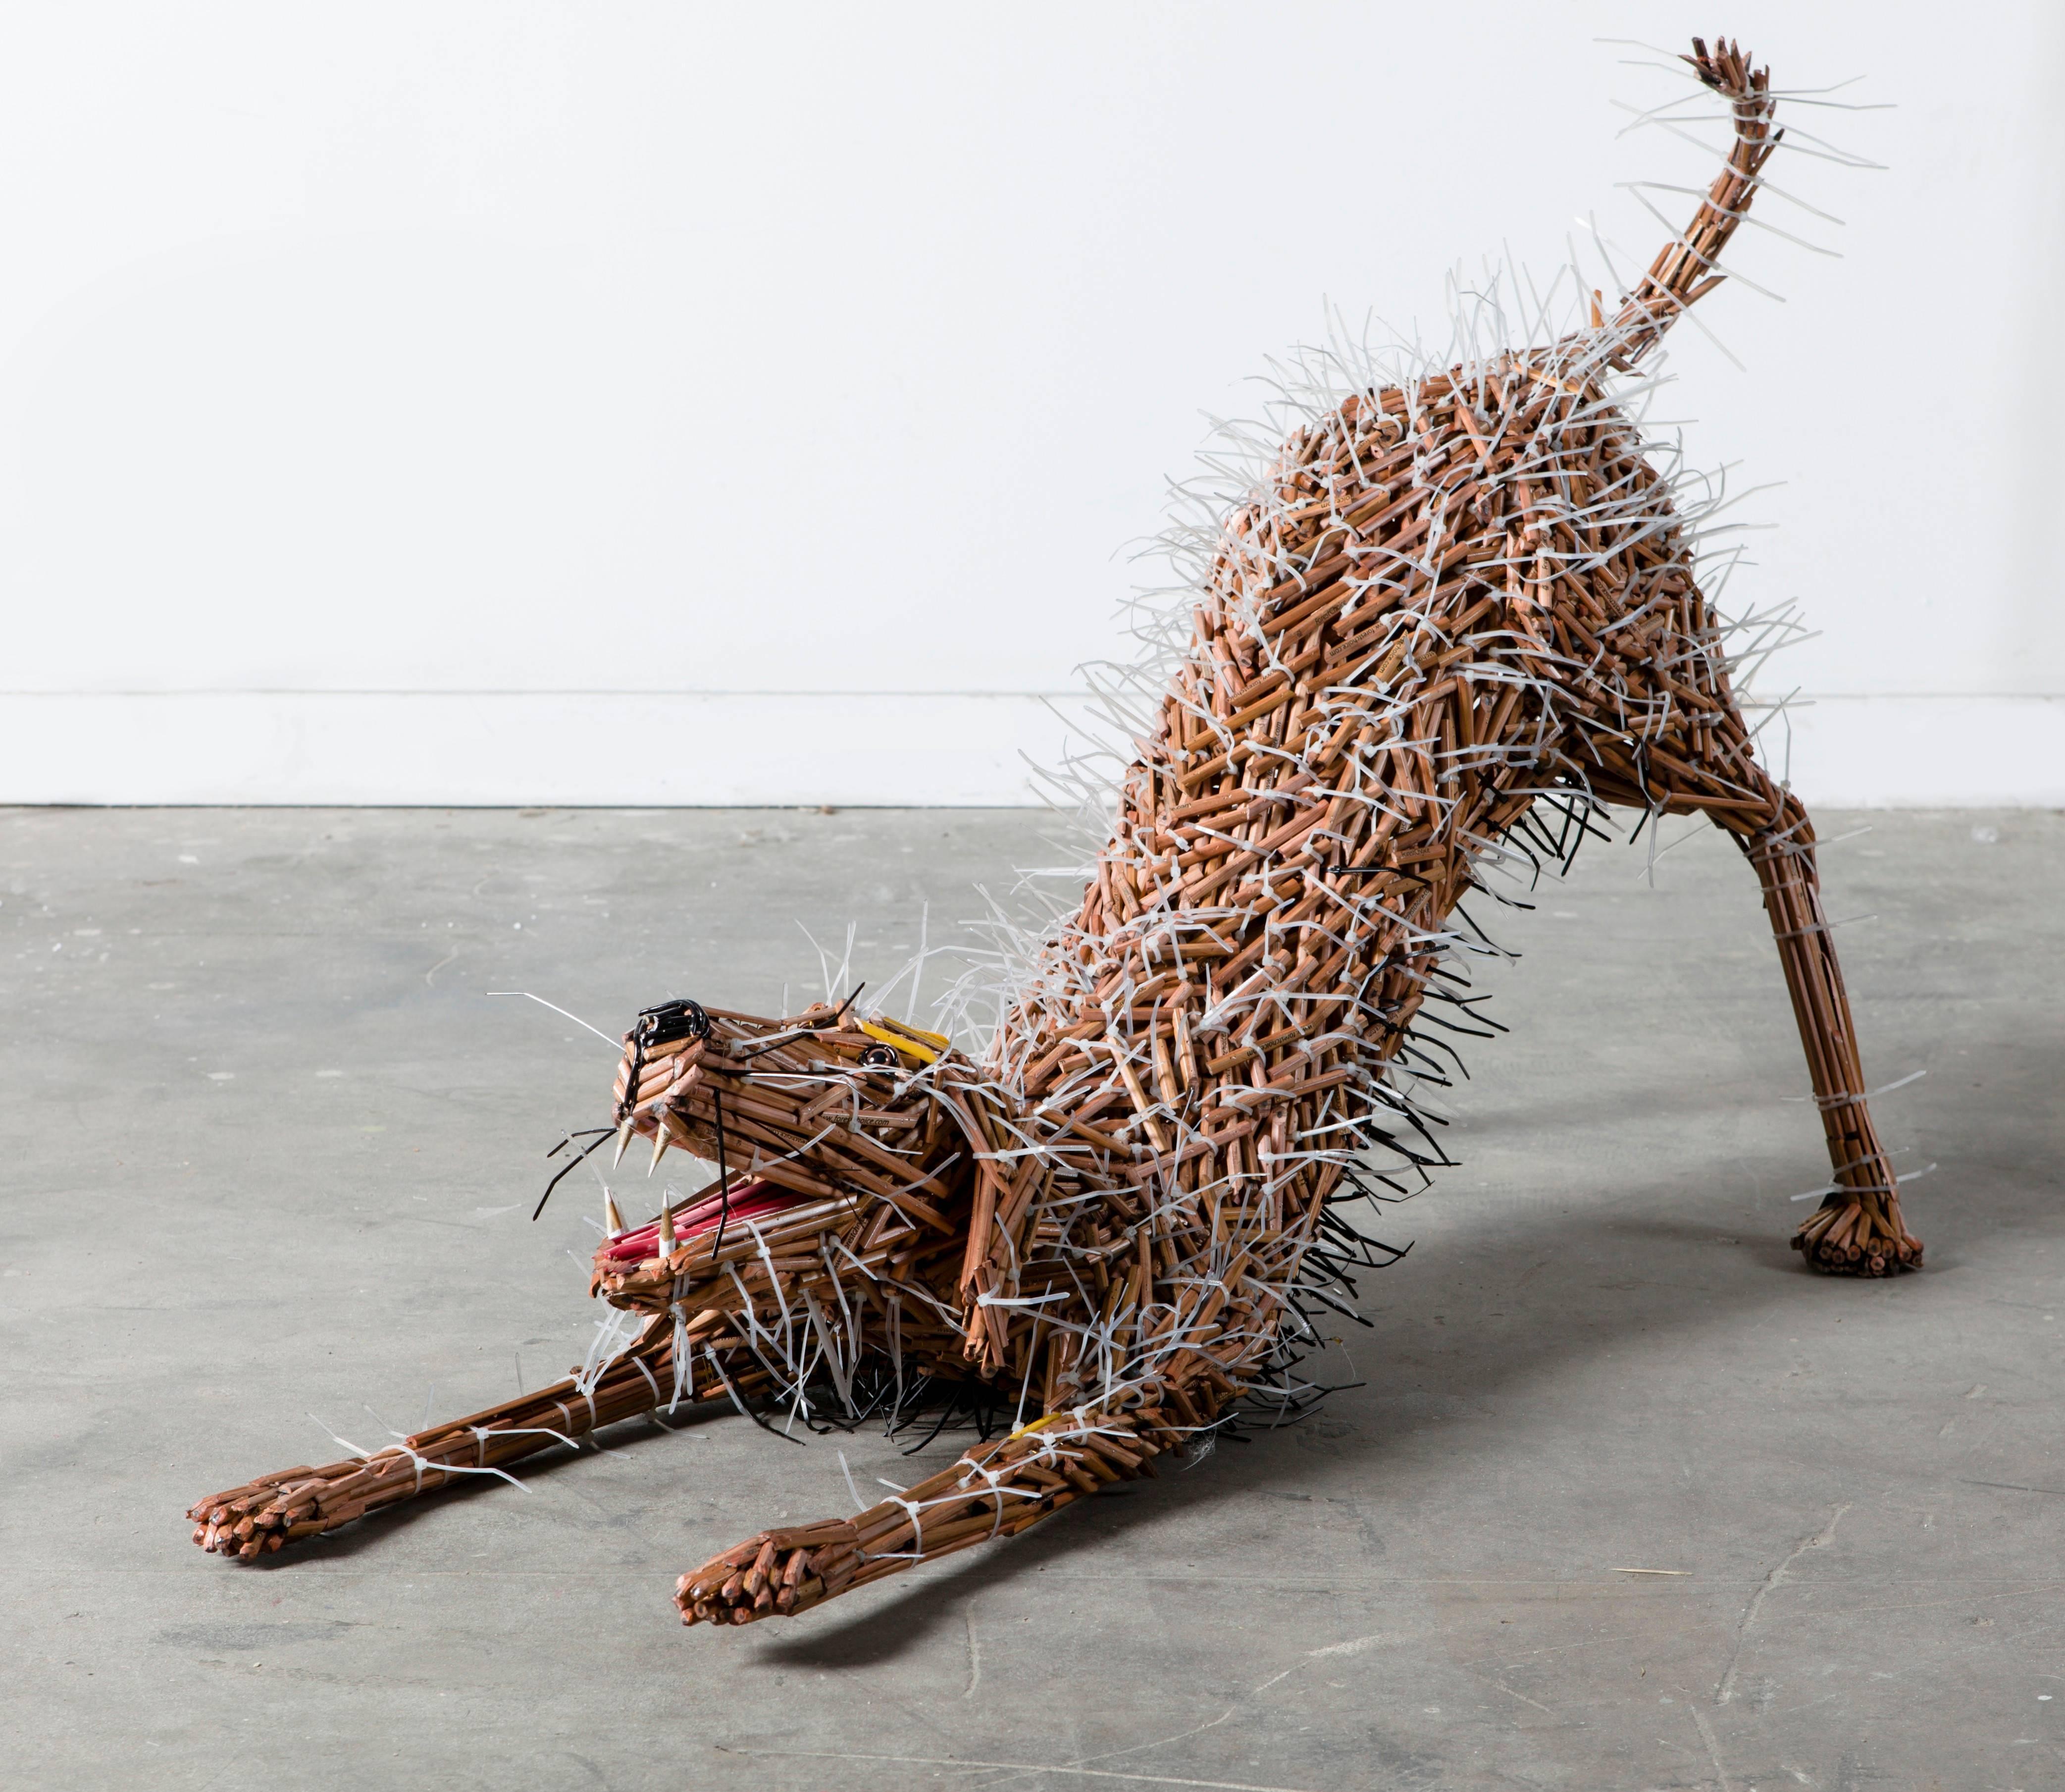 Stretching Dog - Sculpture by Federico Uribe